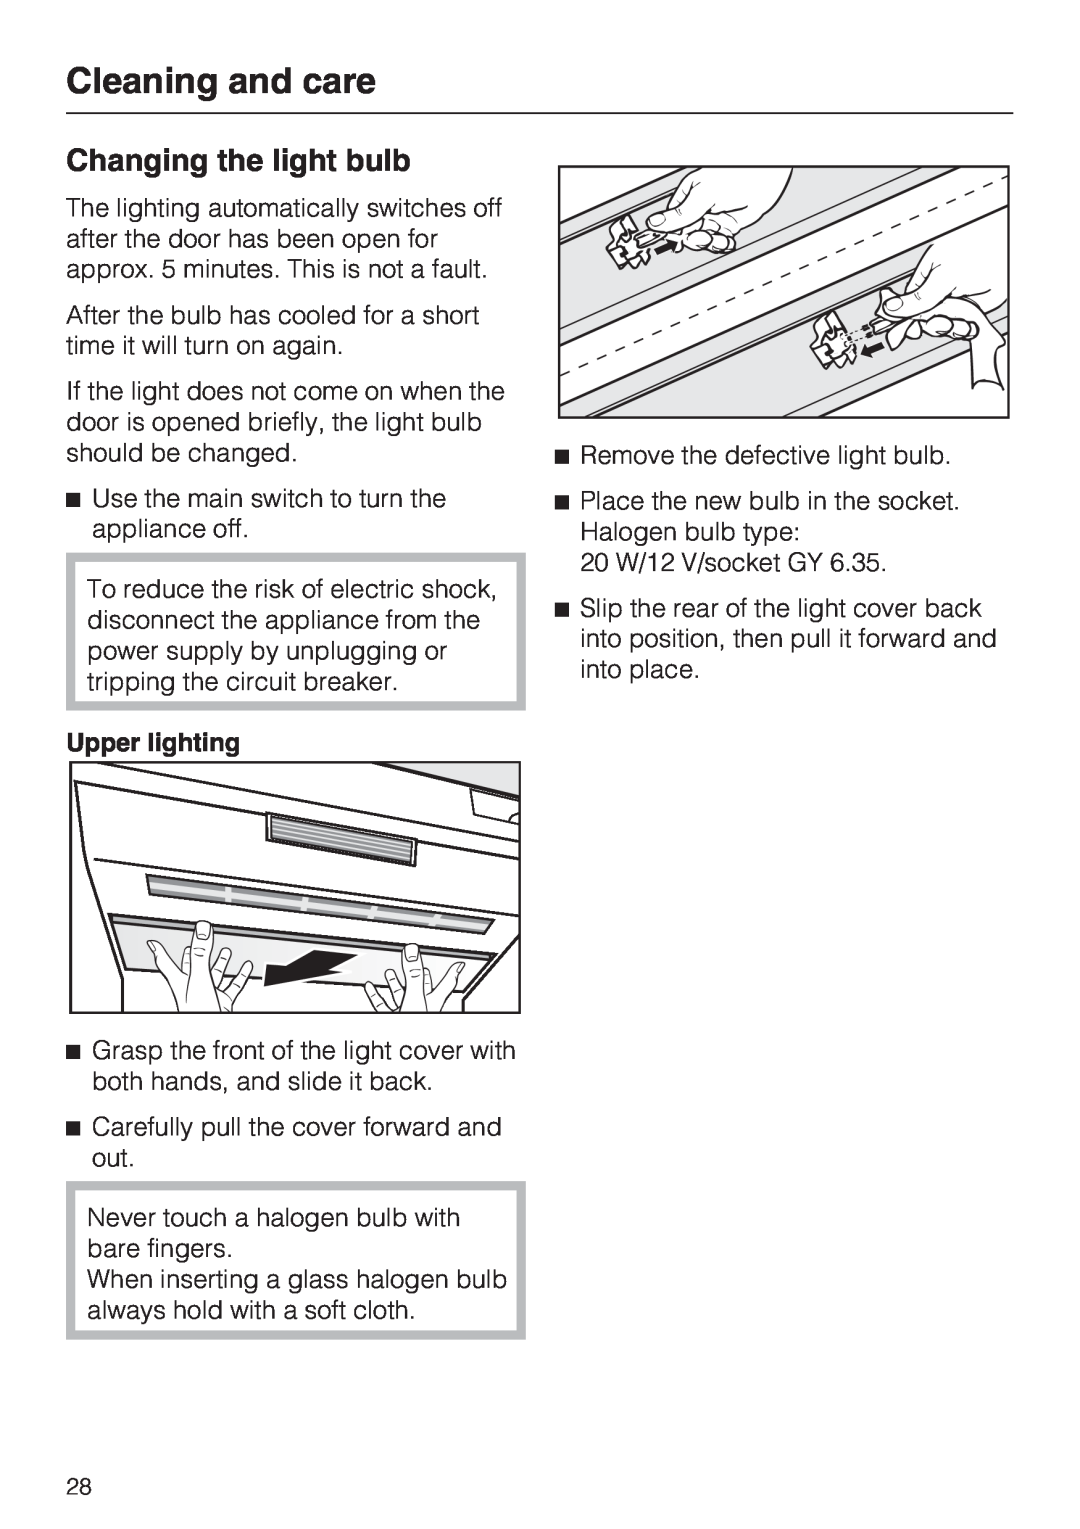 Miele F 1411 SF installation instructions Changing the light bulb, Cleaning and care, Upper lighting 